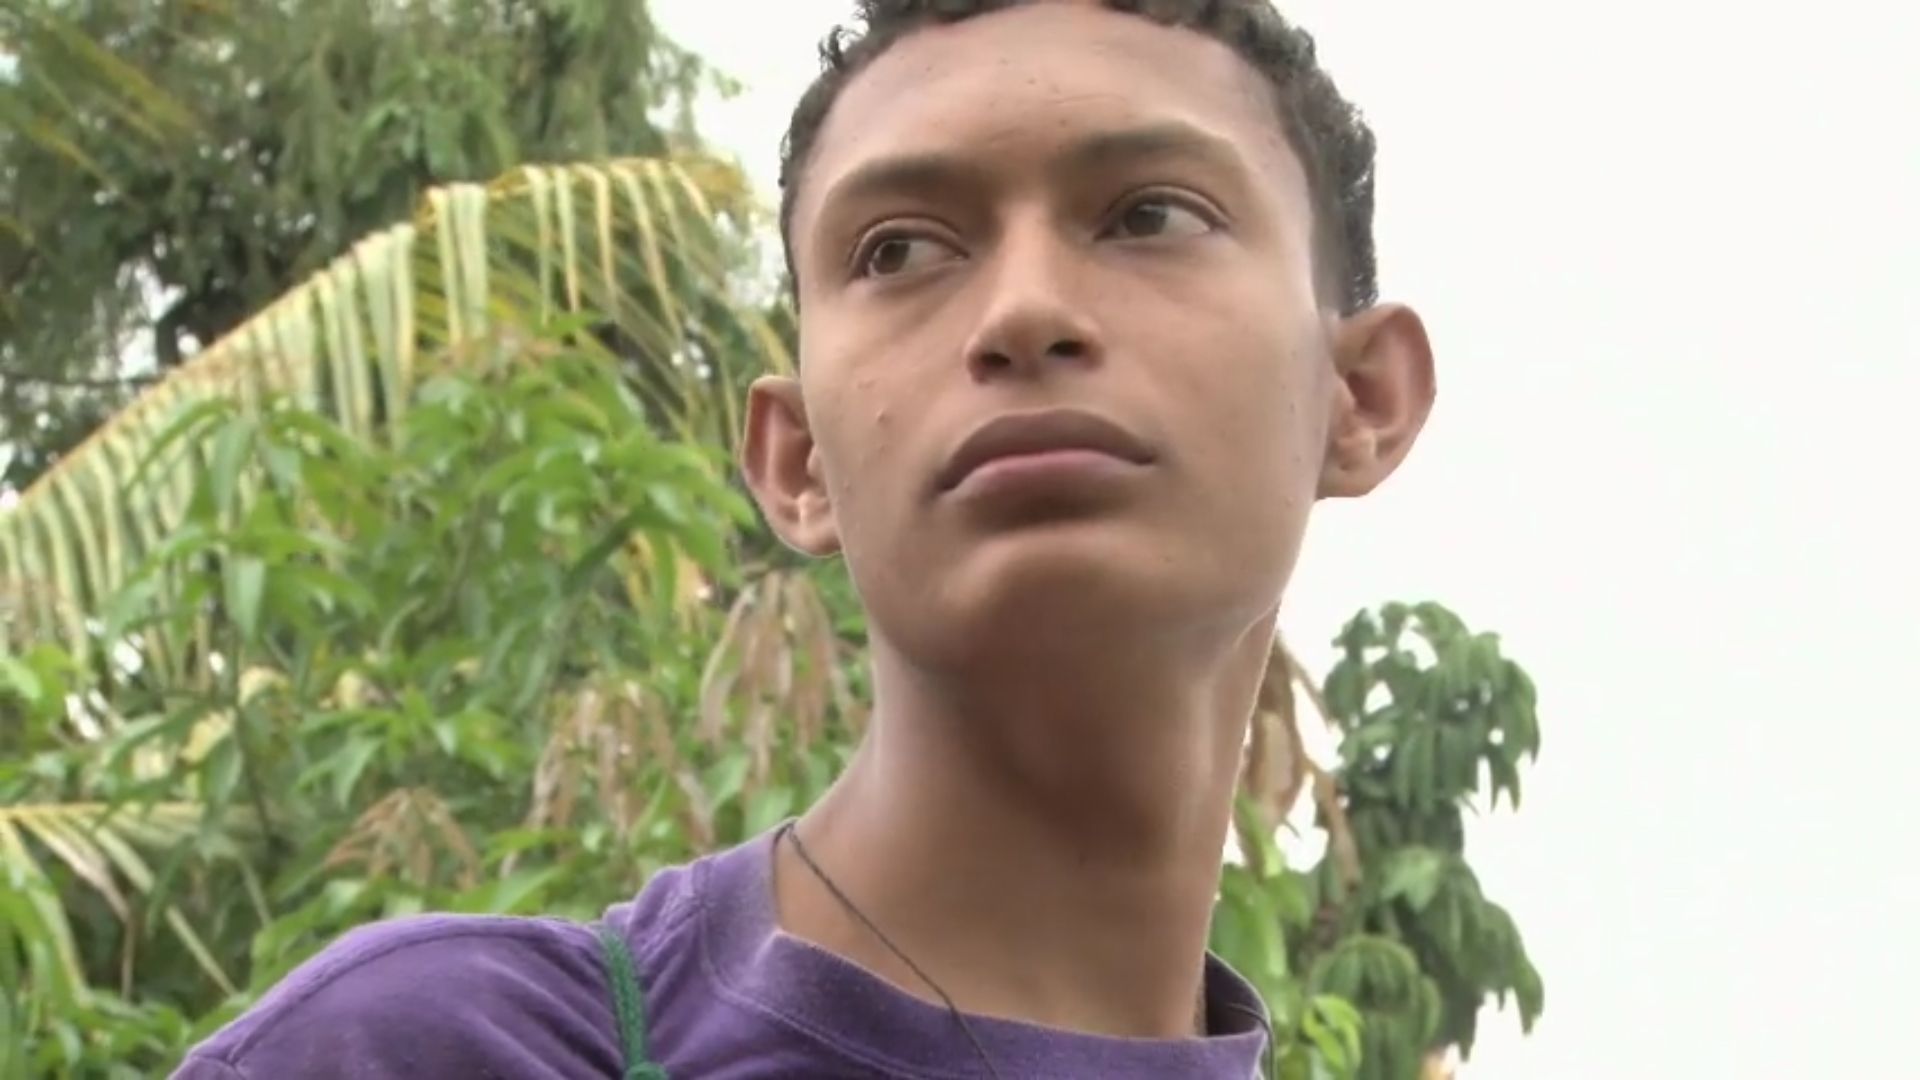 Gustavo, from the film by Craig and Brent Renaud. Honduras, 2015.